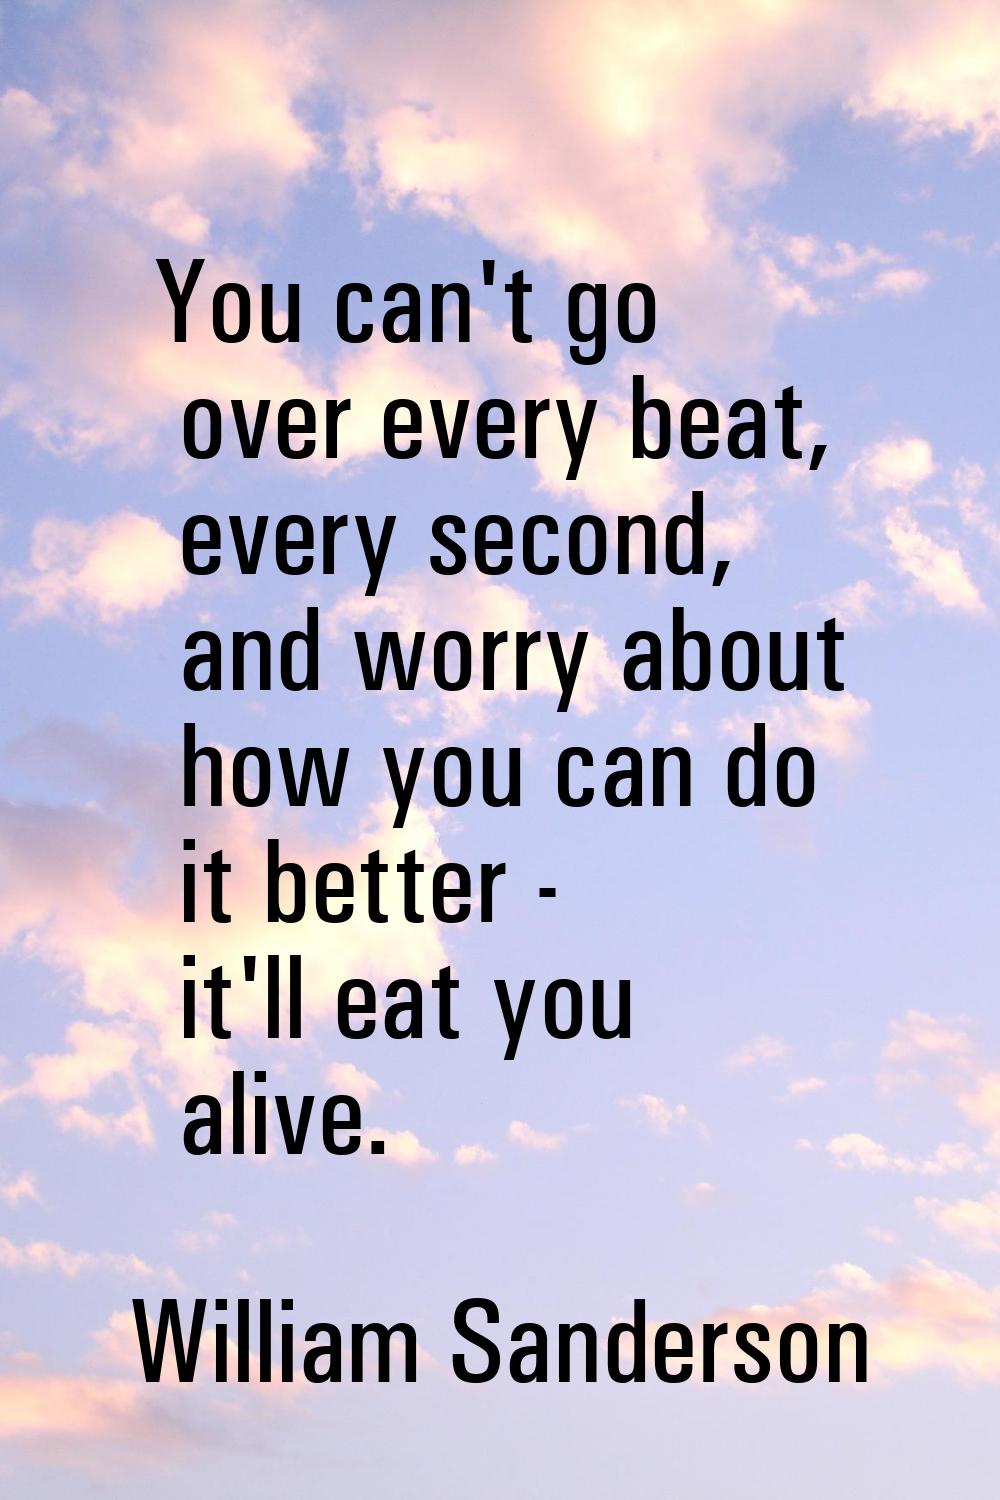 You can't go over every beat, every second, and worry about how you can do it better - it'll eat yo